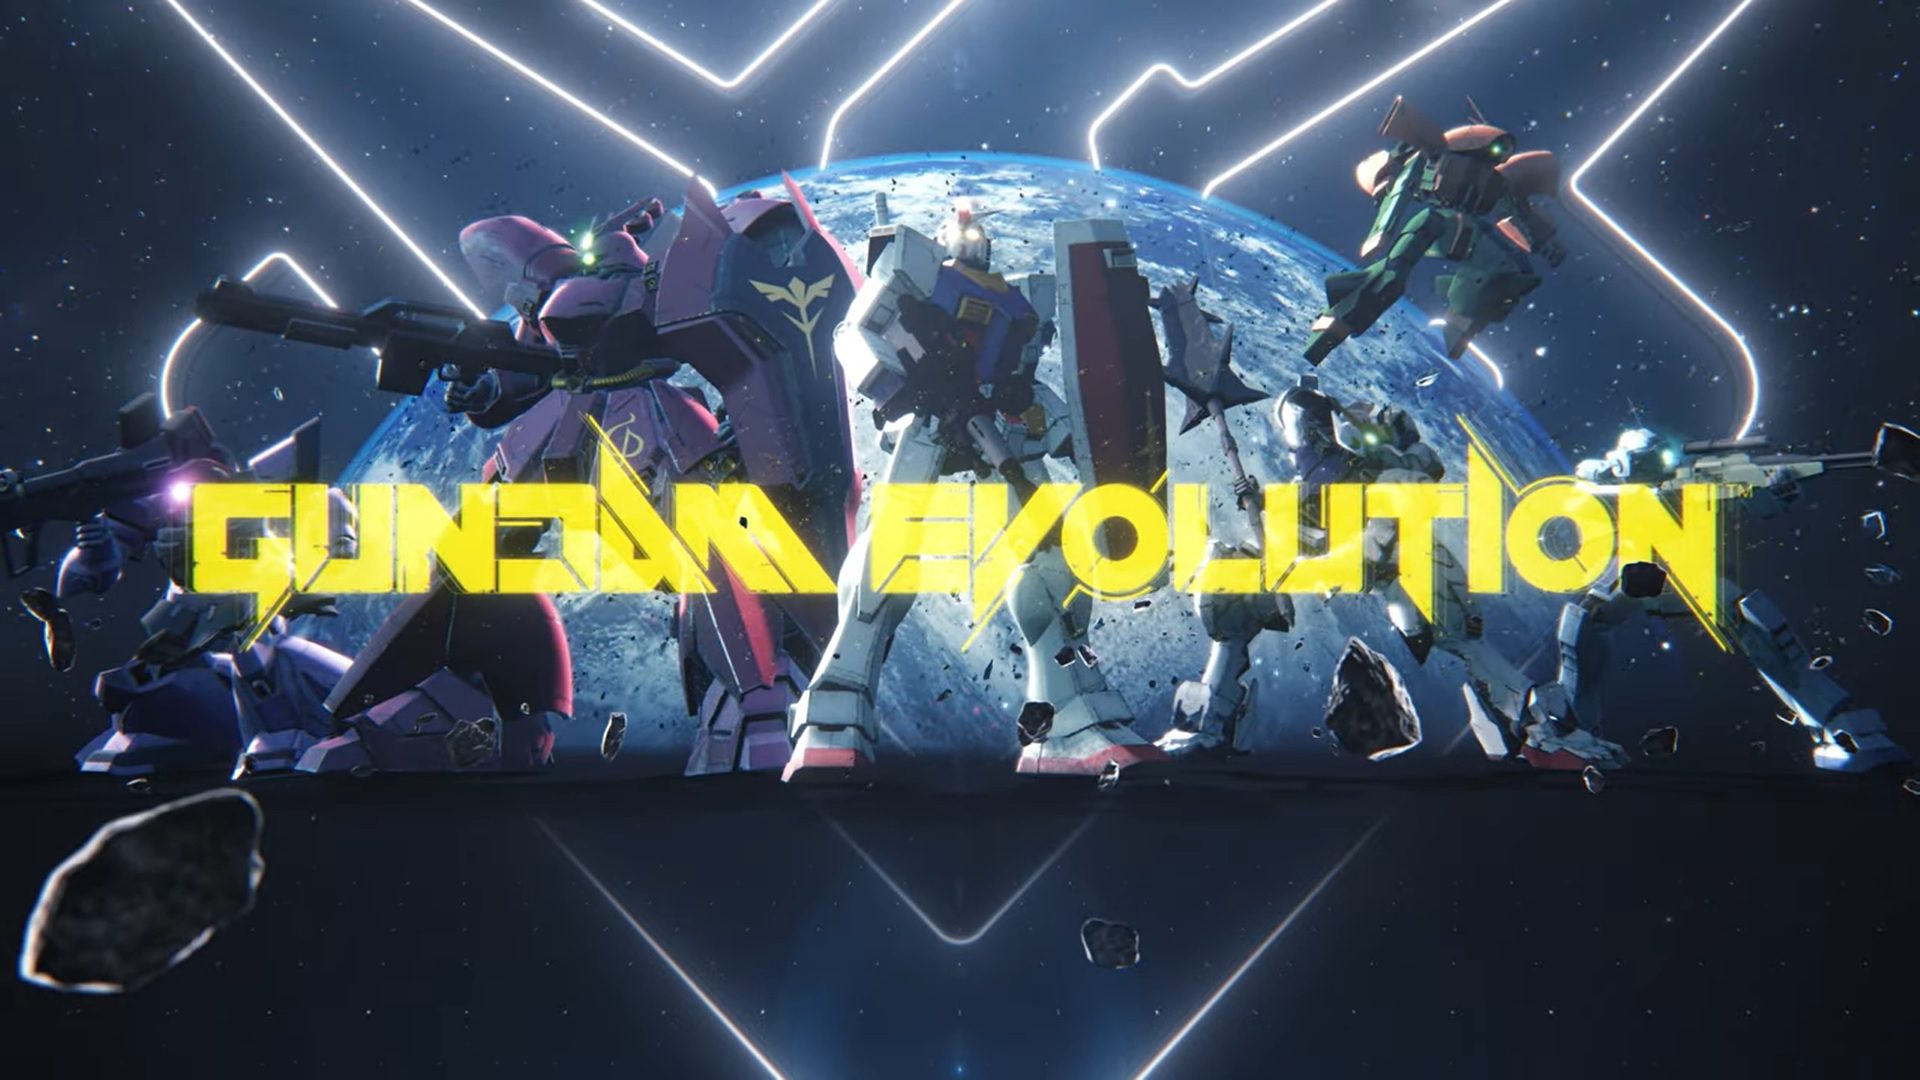 You can now try Gundam Evolution on your Xbox